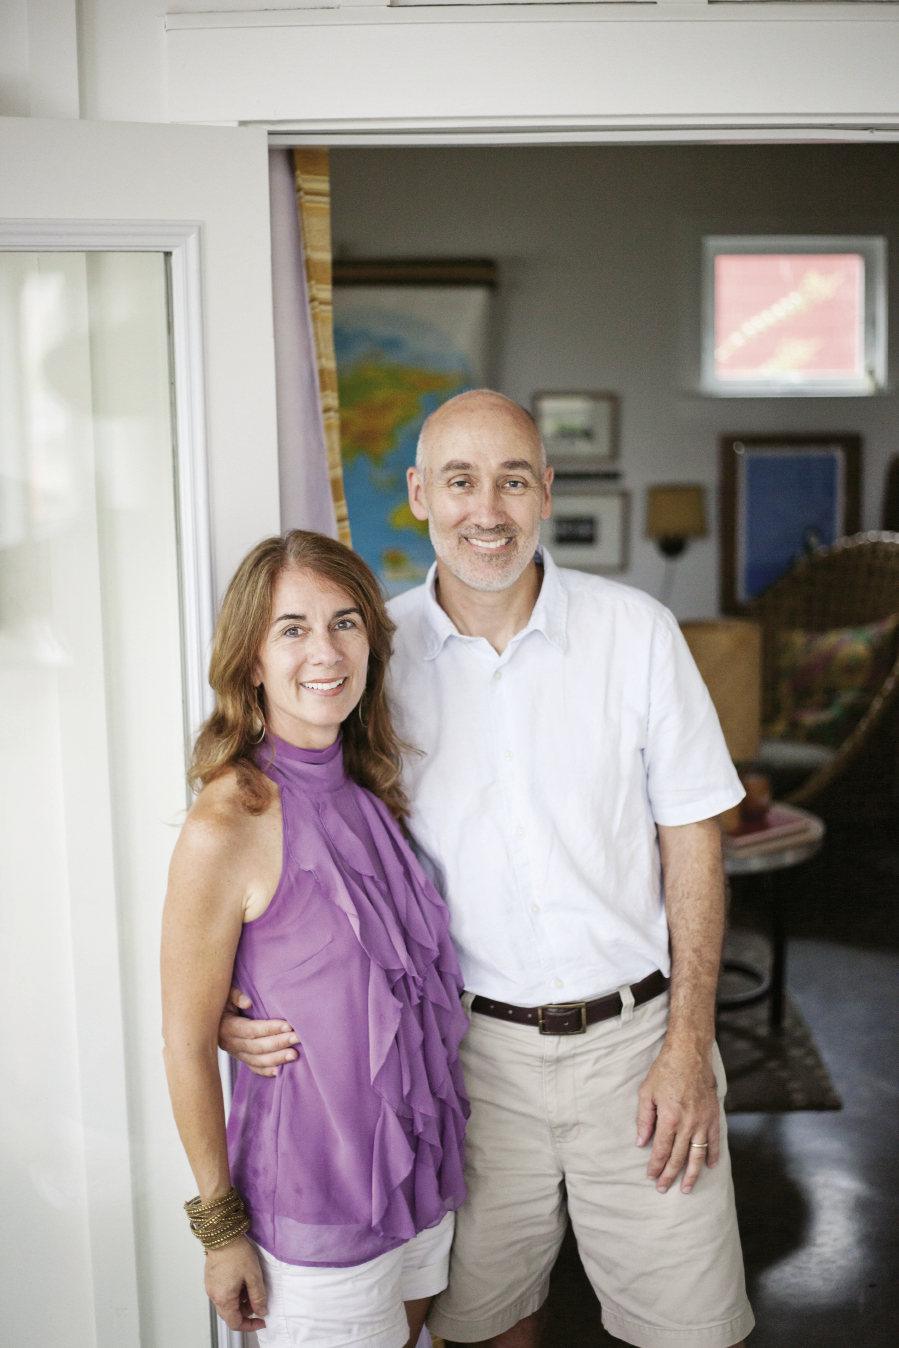 Homeowners Jennifer Mathis and Mike Cline